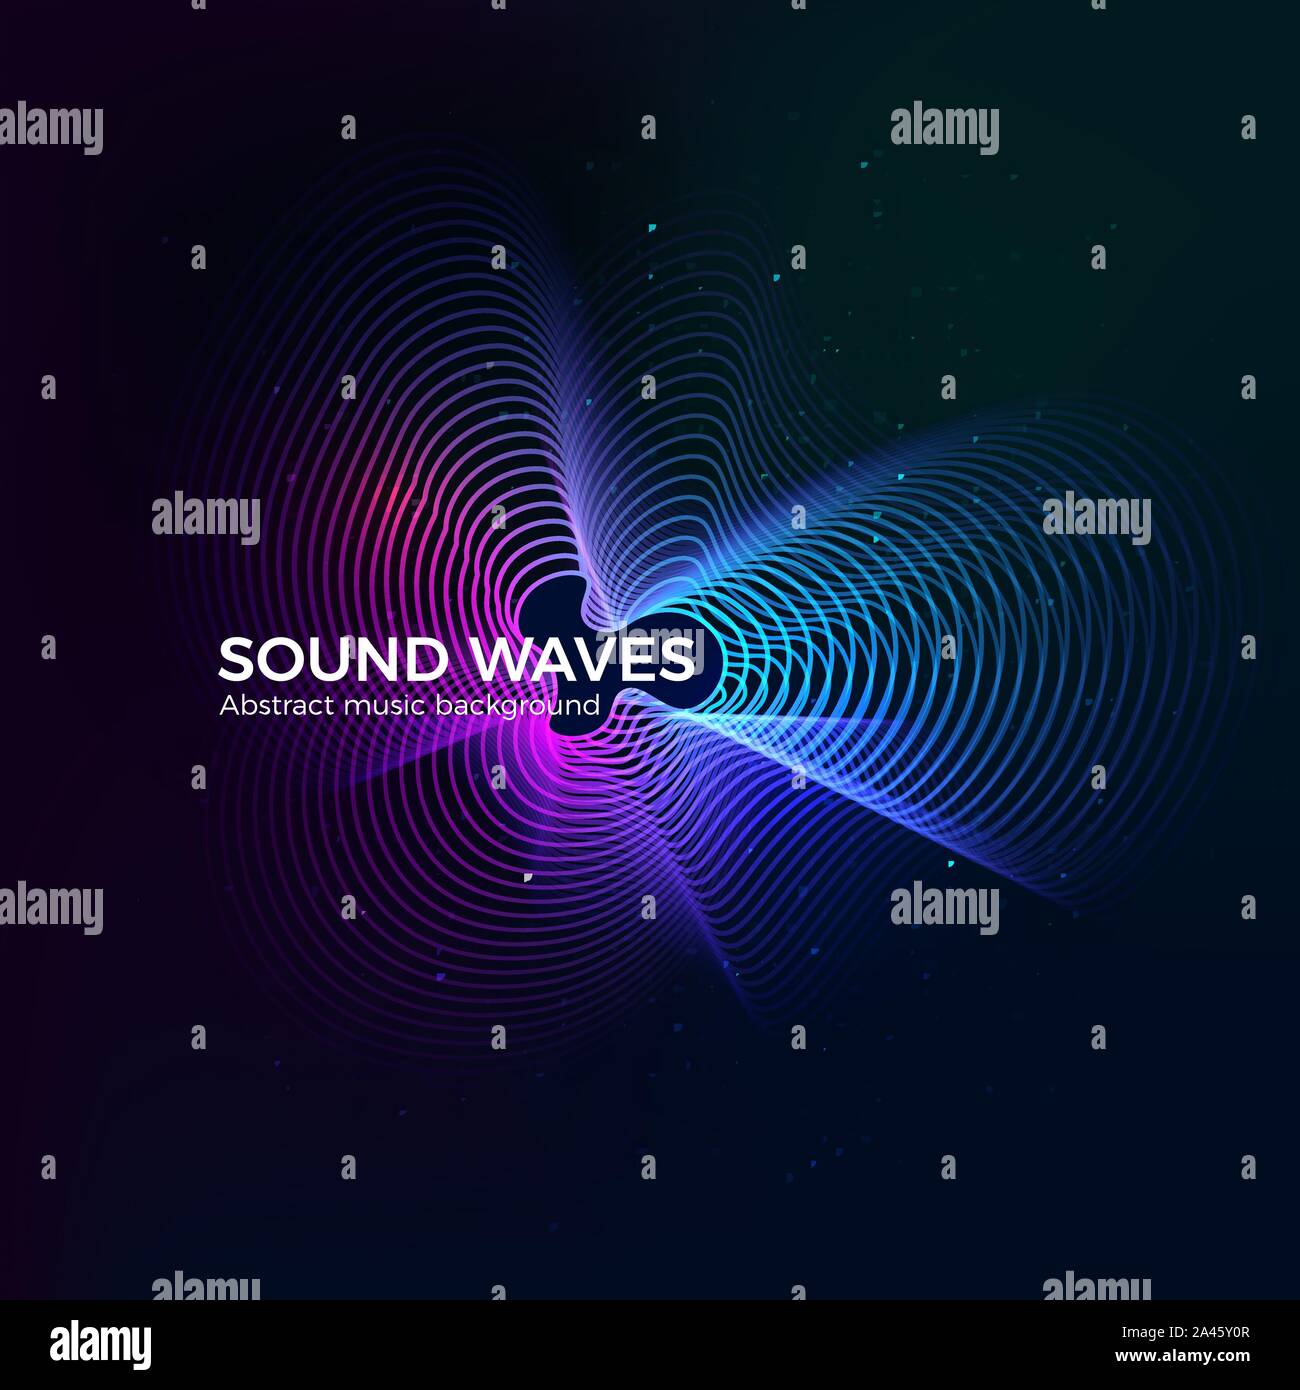 Dynamic radial sound equalizer design. Music album cover template. Abstract circular digital data form. Vector illustration Stock Vector